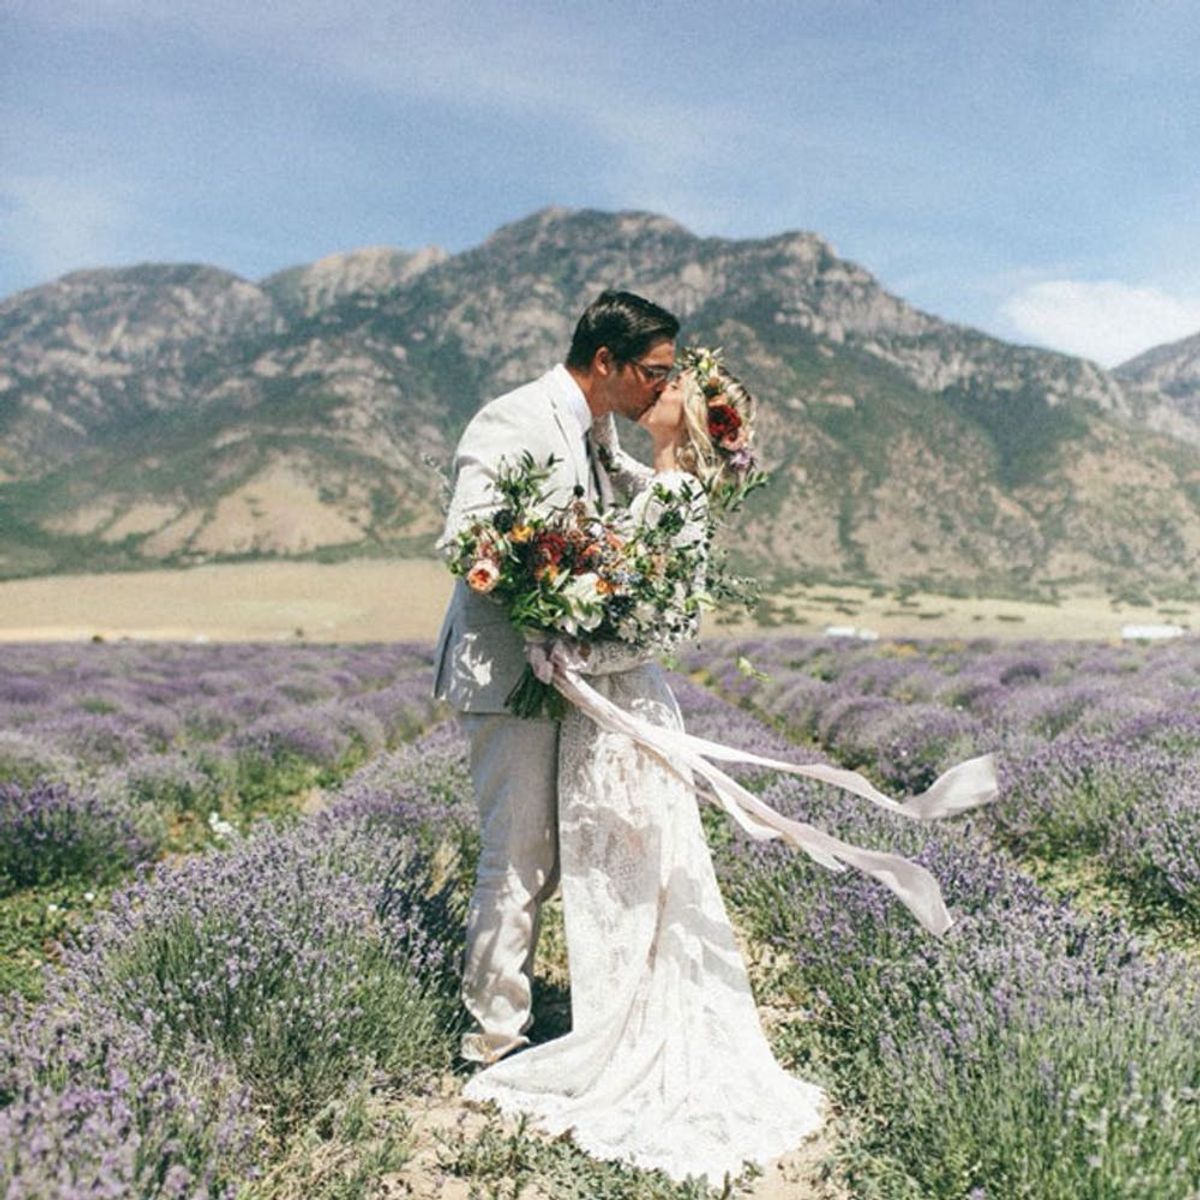 14 Spring Wedding Photo Ideas You Won’t Want to Miss Out On